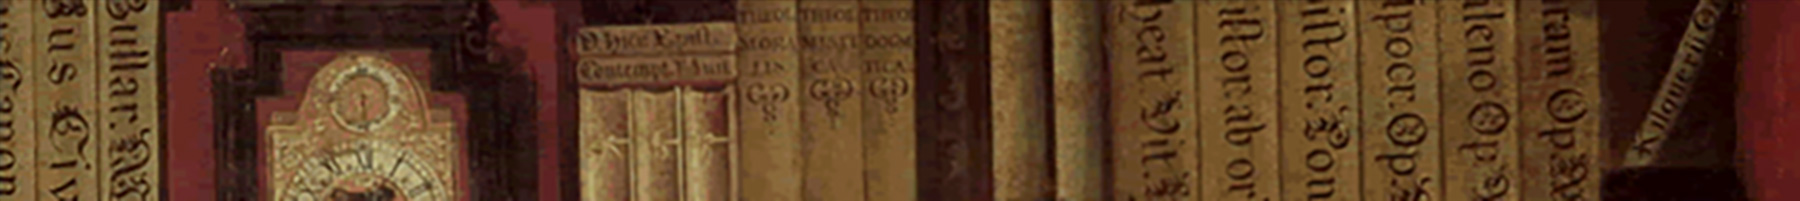 painting of old books on a shelf